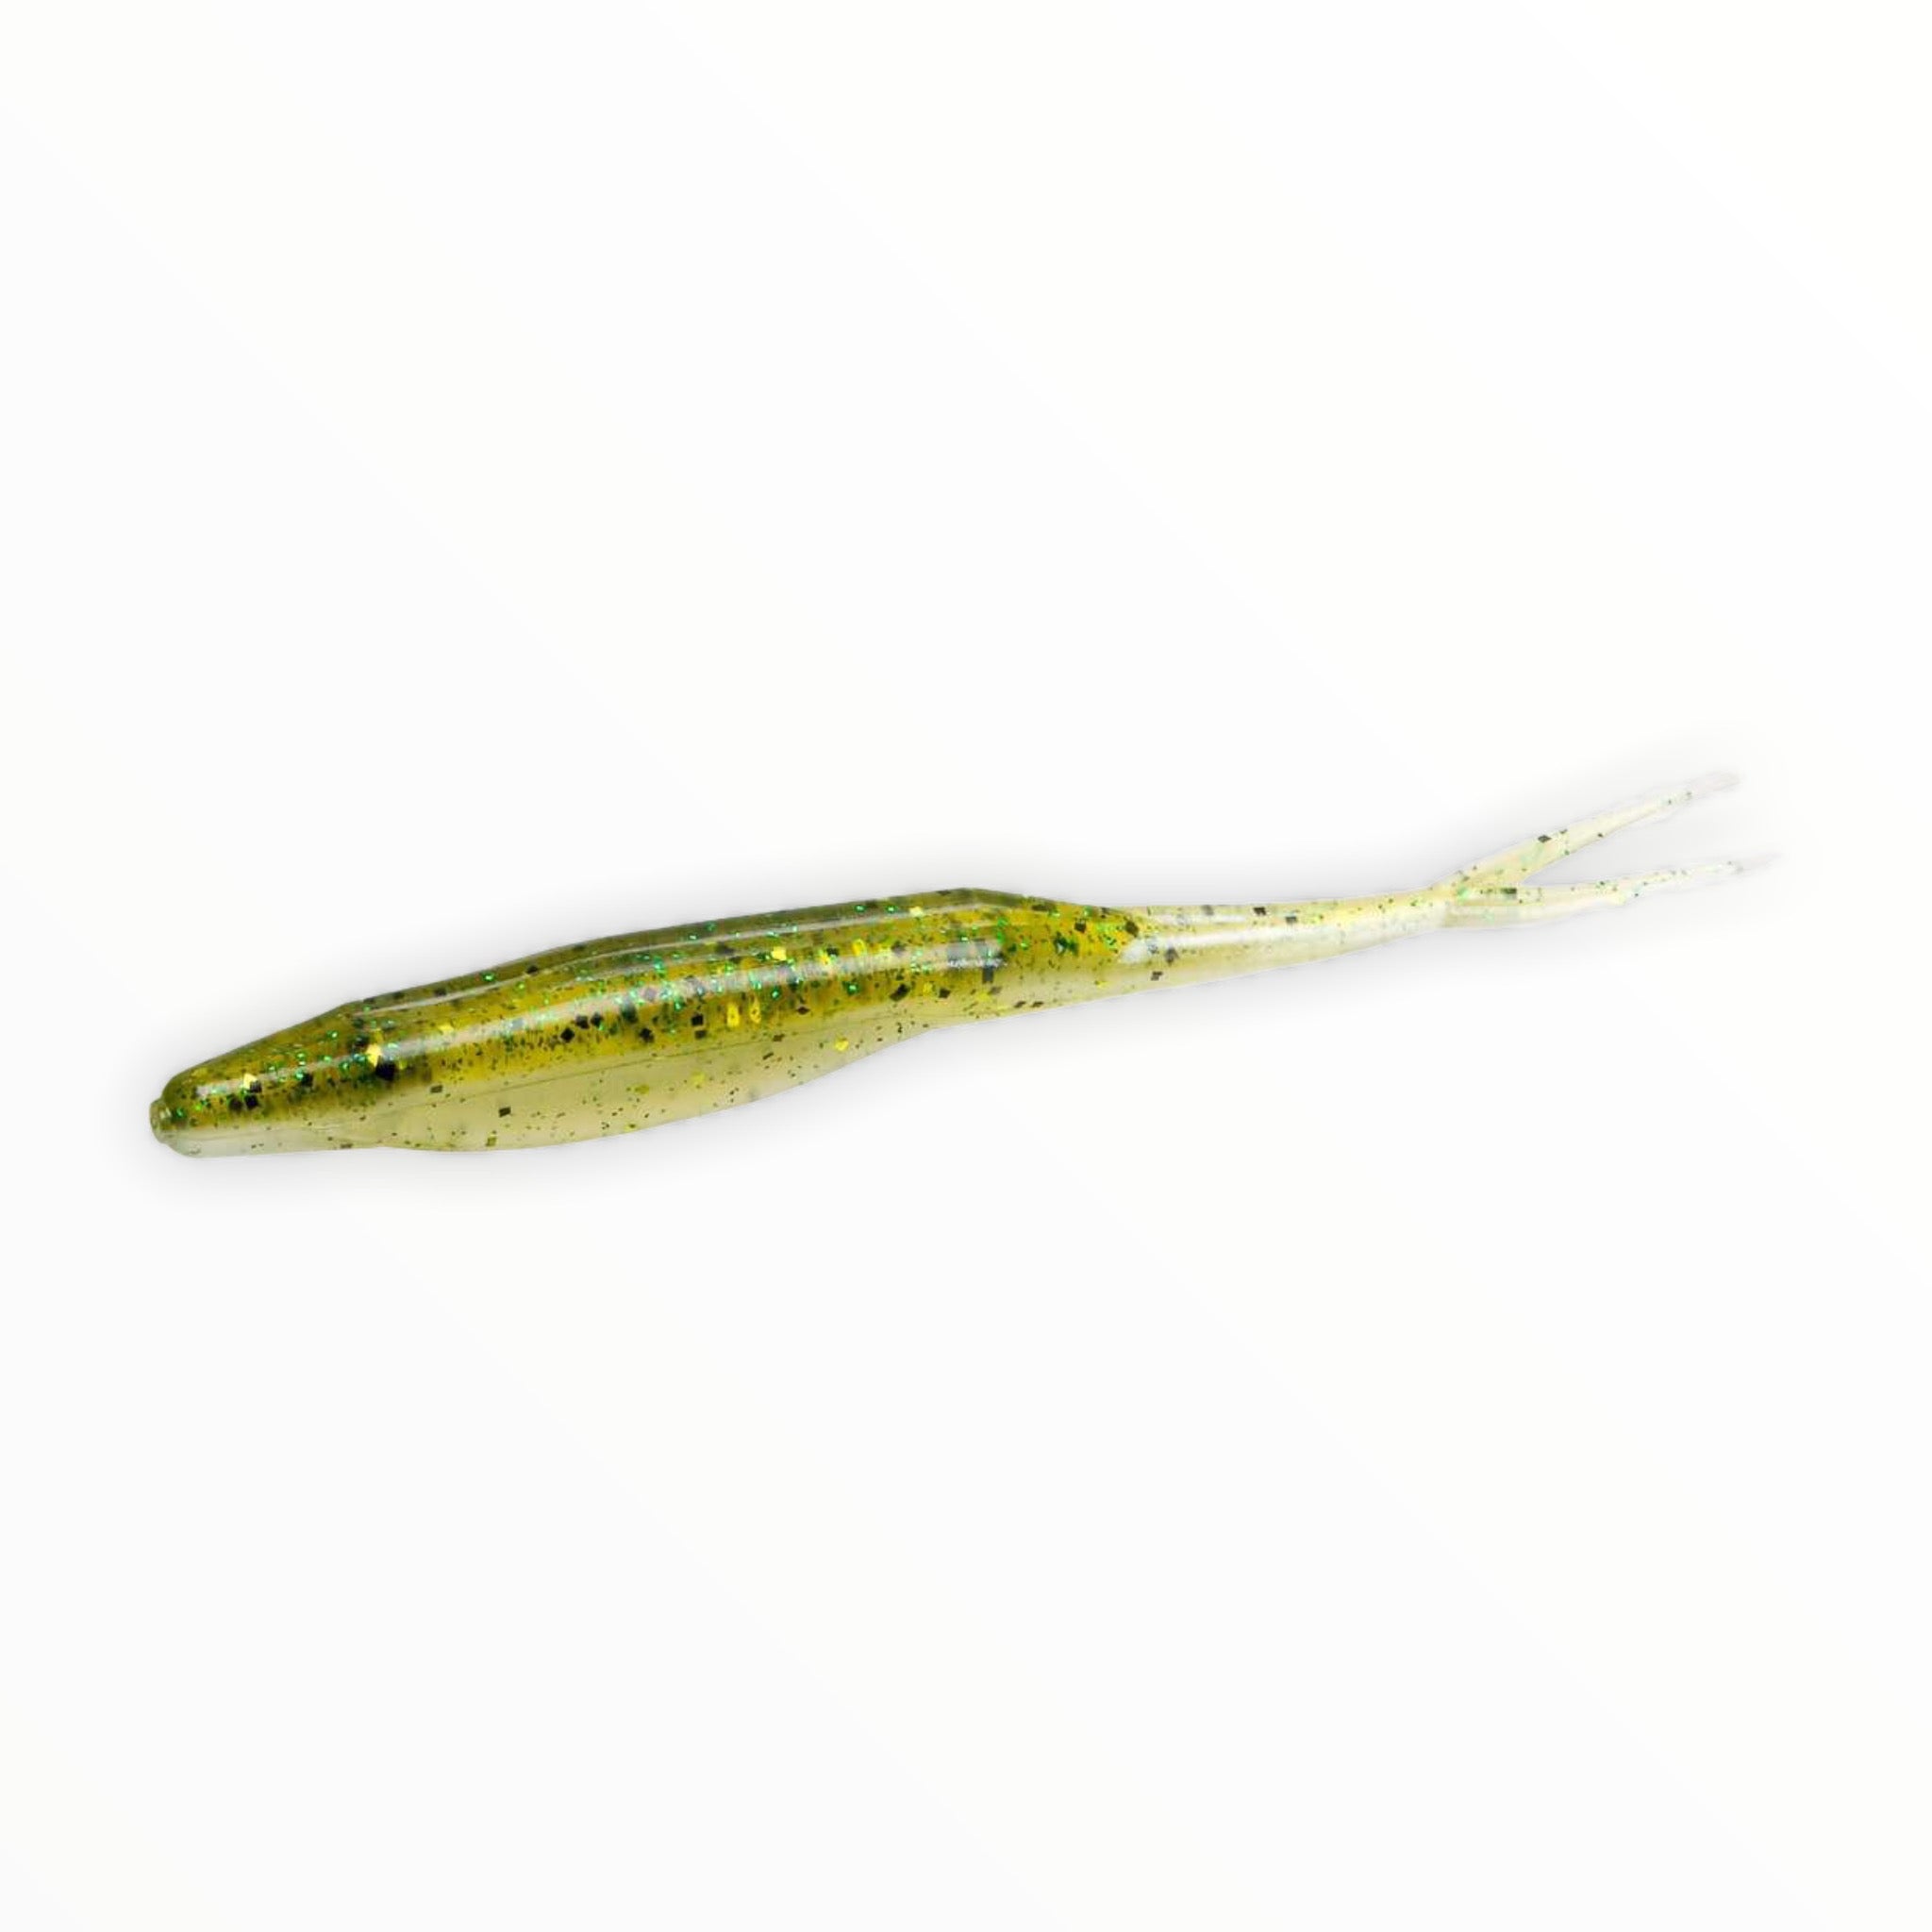 TREHOOK 8cm 10g Multi Jointed Swimbait Pike Jerkbaits Fishing Lures  Wobblers Artificial Bait for Sinking Minnow Lure Crankbait